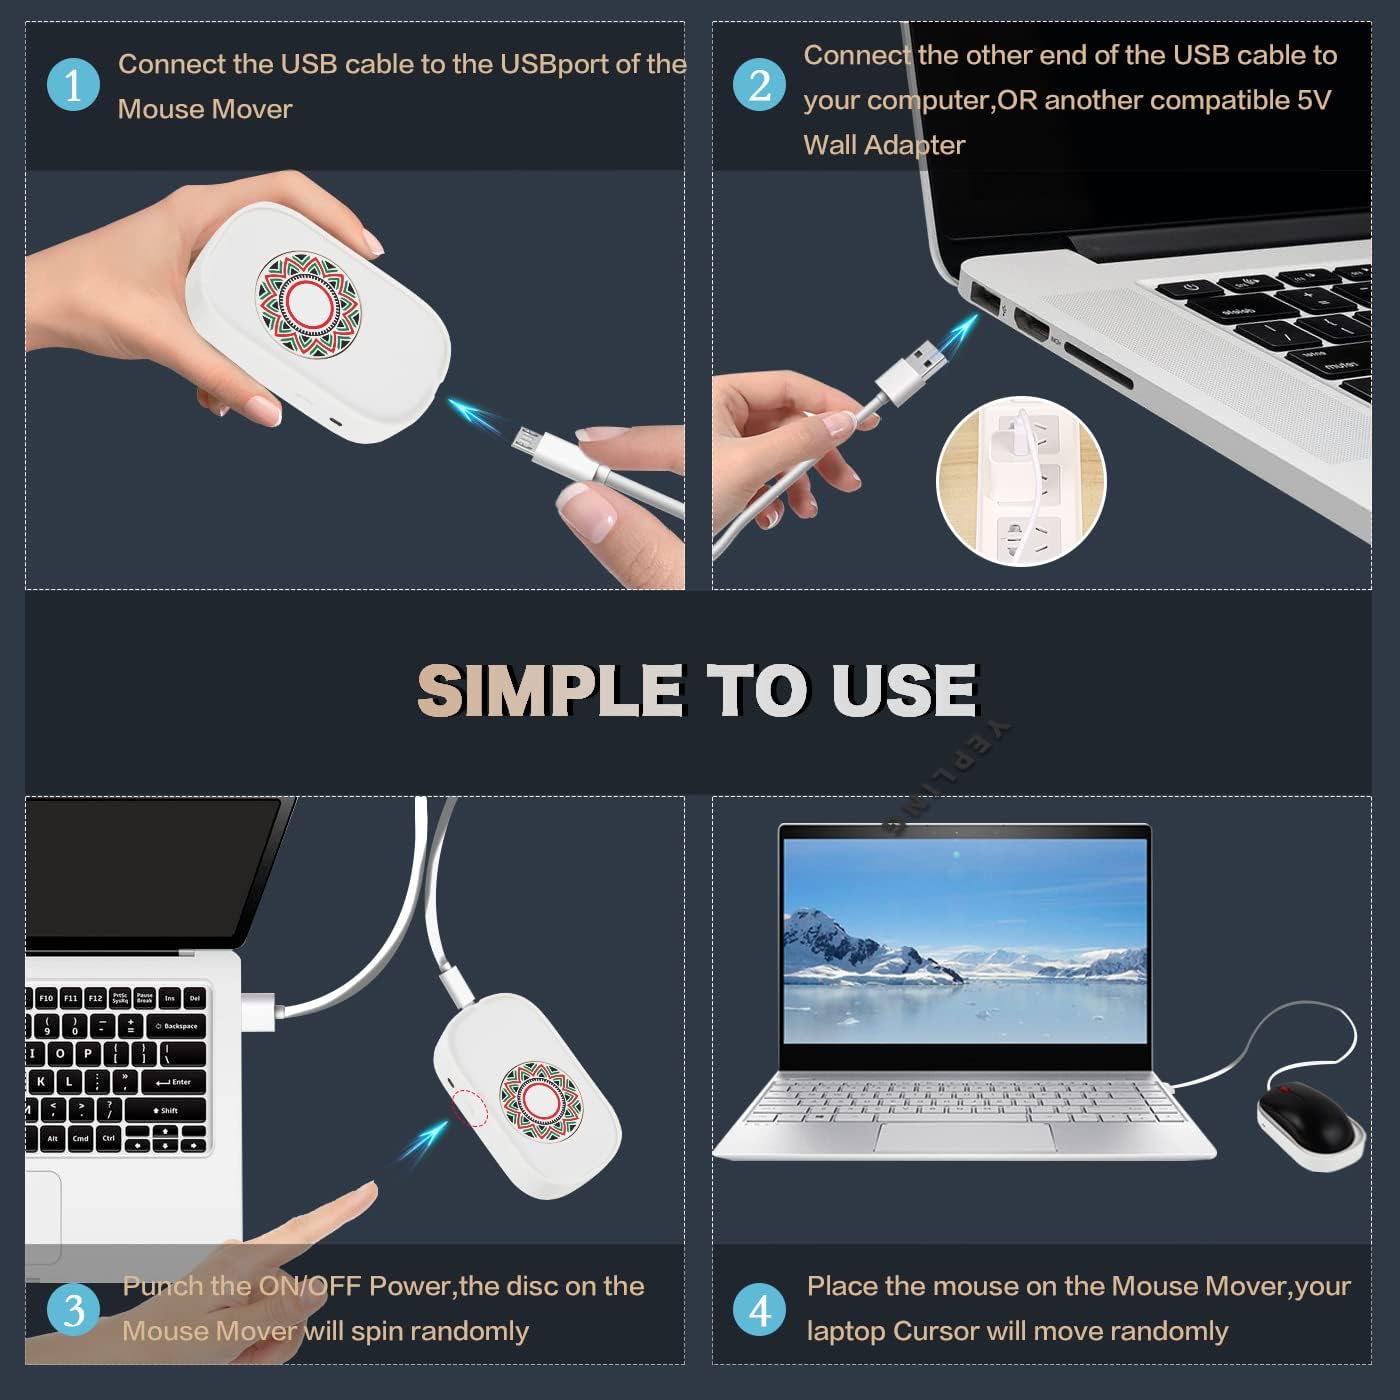 Mouse Jiggler ,Computer Mouse Mover with Button, Laptop,Driver-Free Keeps  Awake